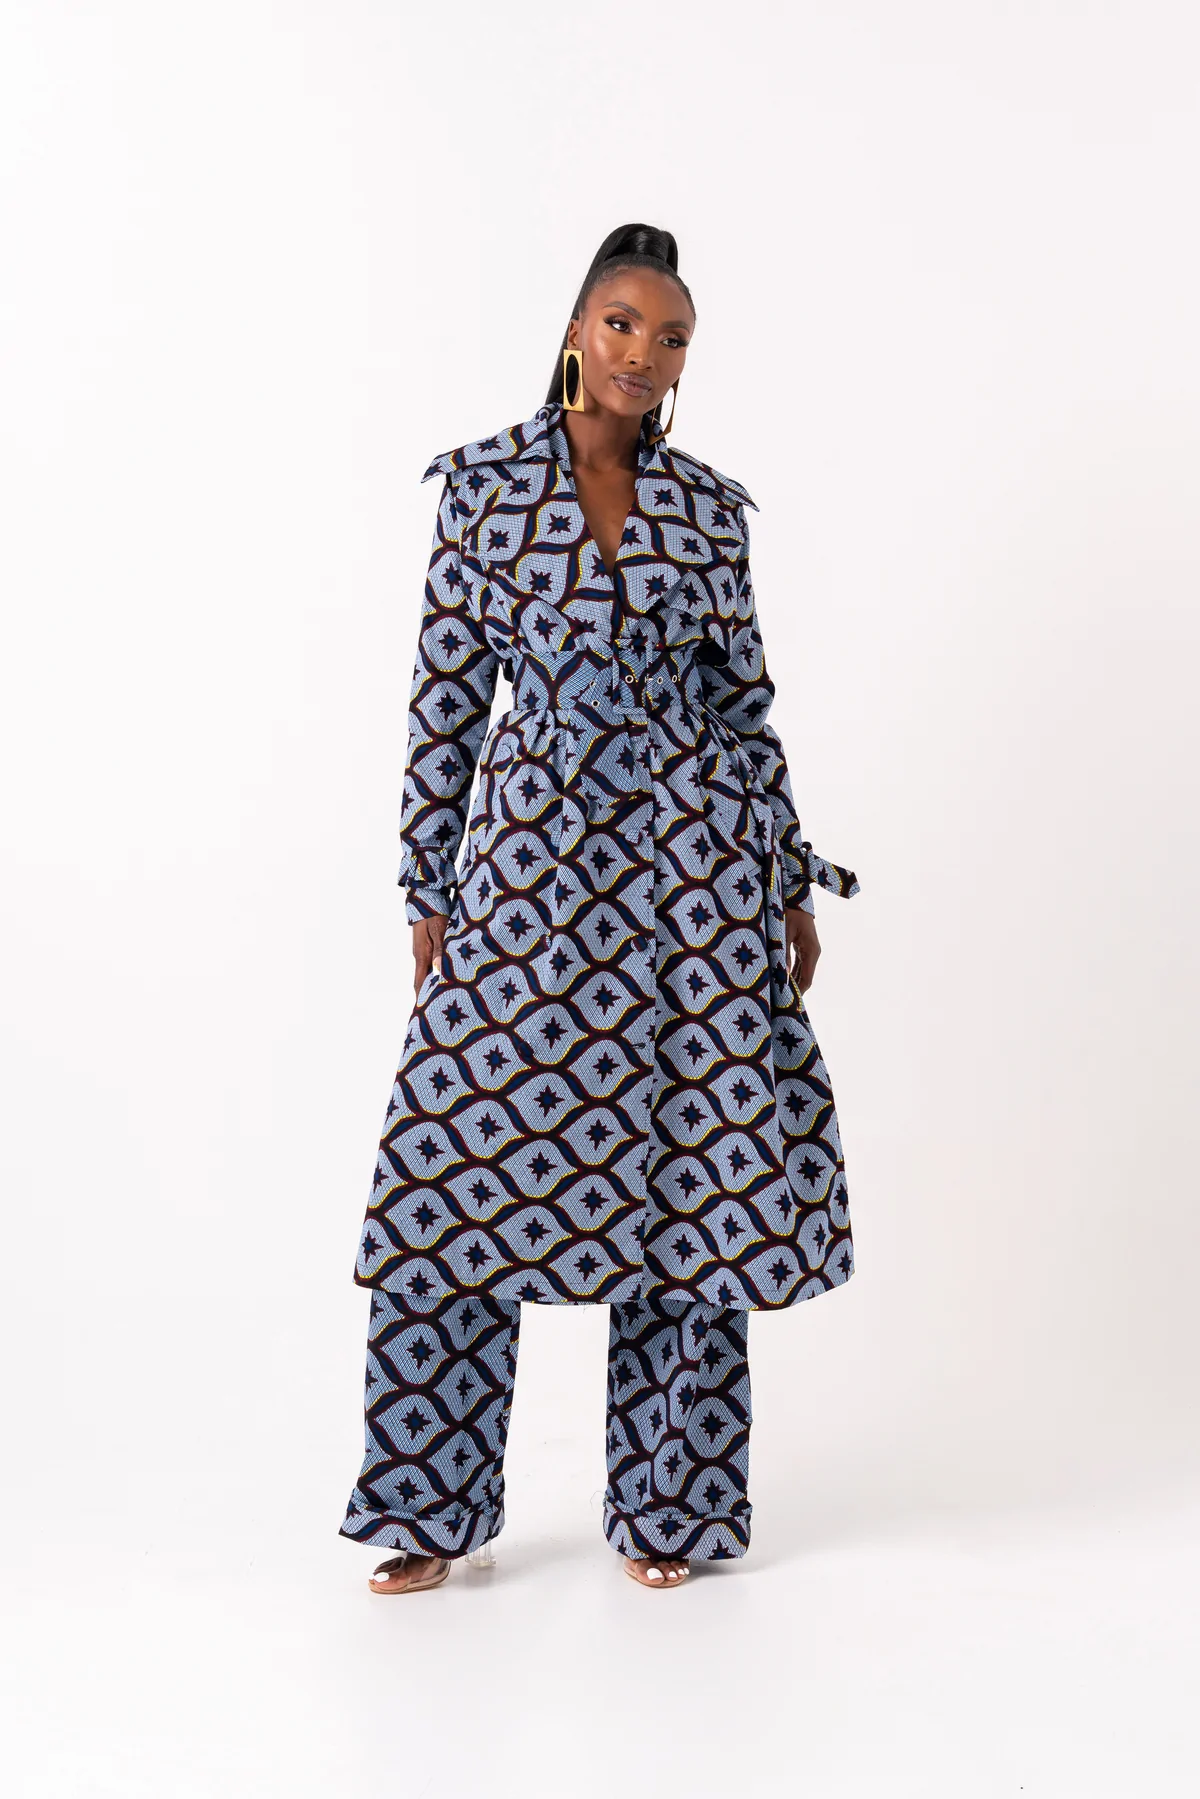 Best African Fashion Styles_Simi Trench Coat Jacket